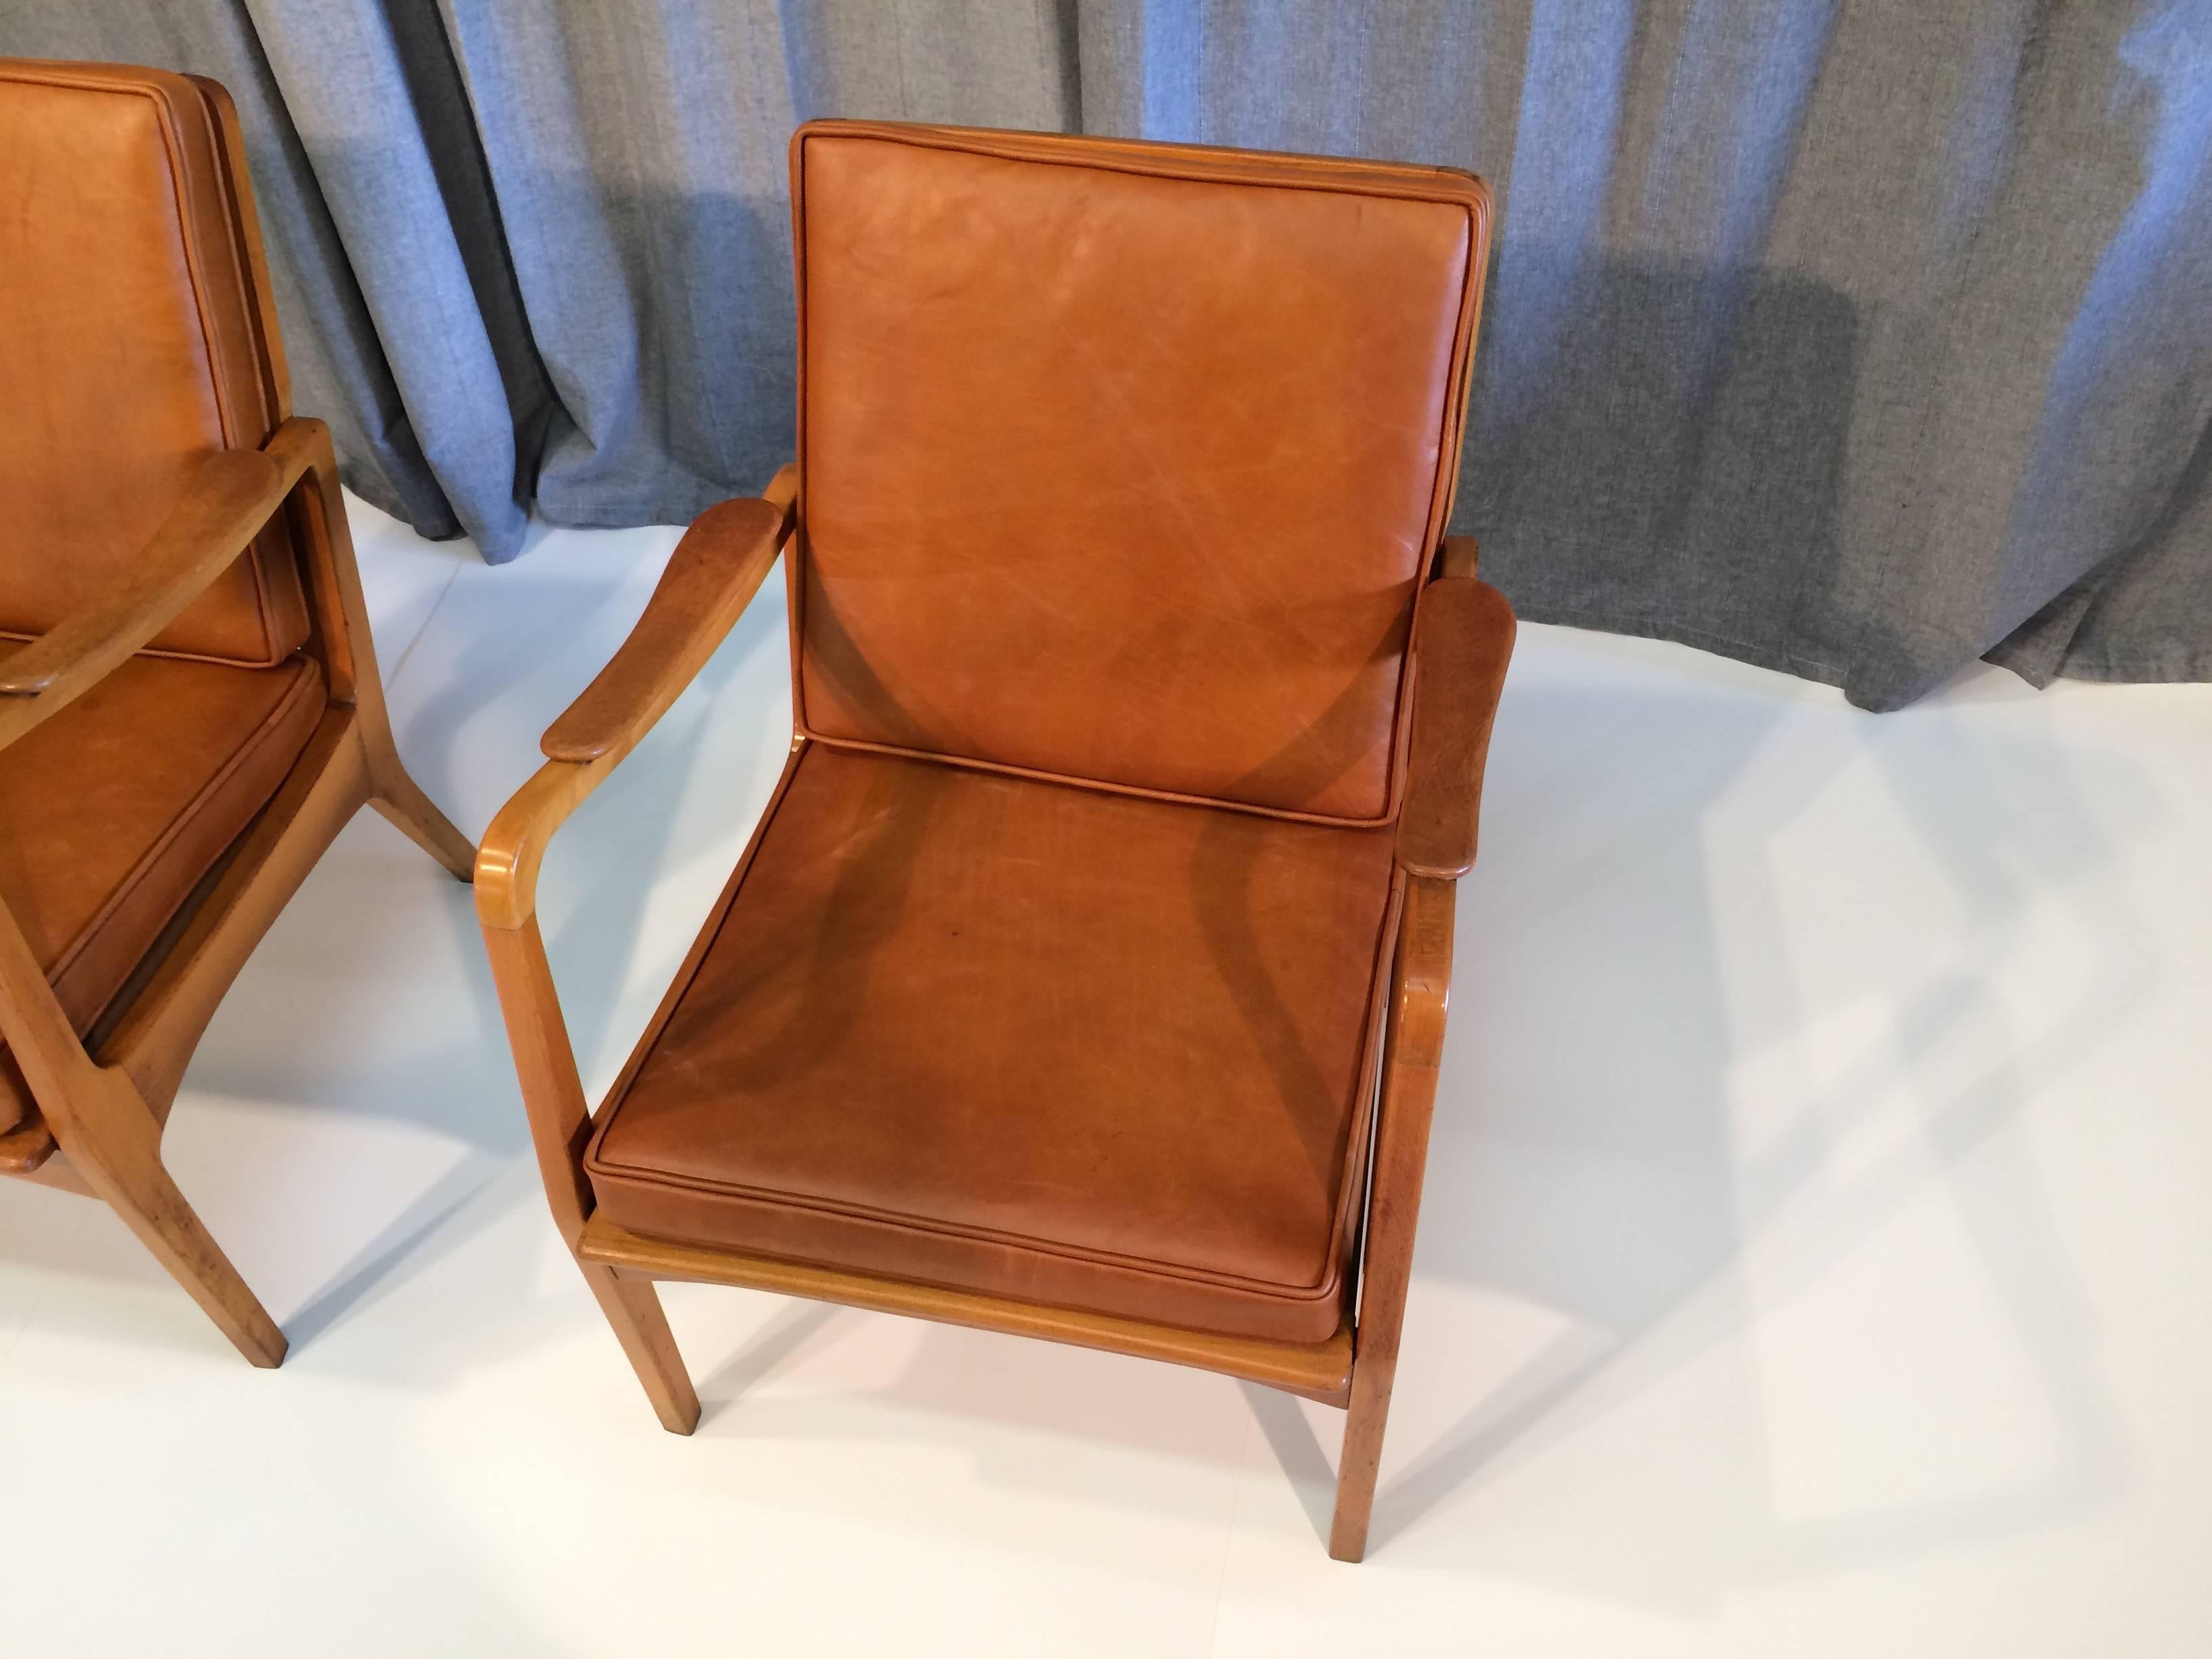 Beautiful Pair of Danish Armchairs, Denmark, 1950s Birch and Cognac Leather 1